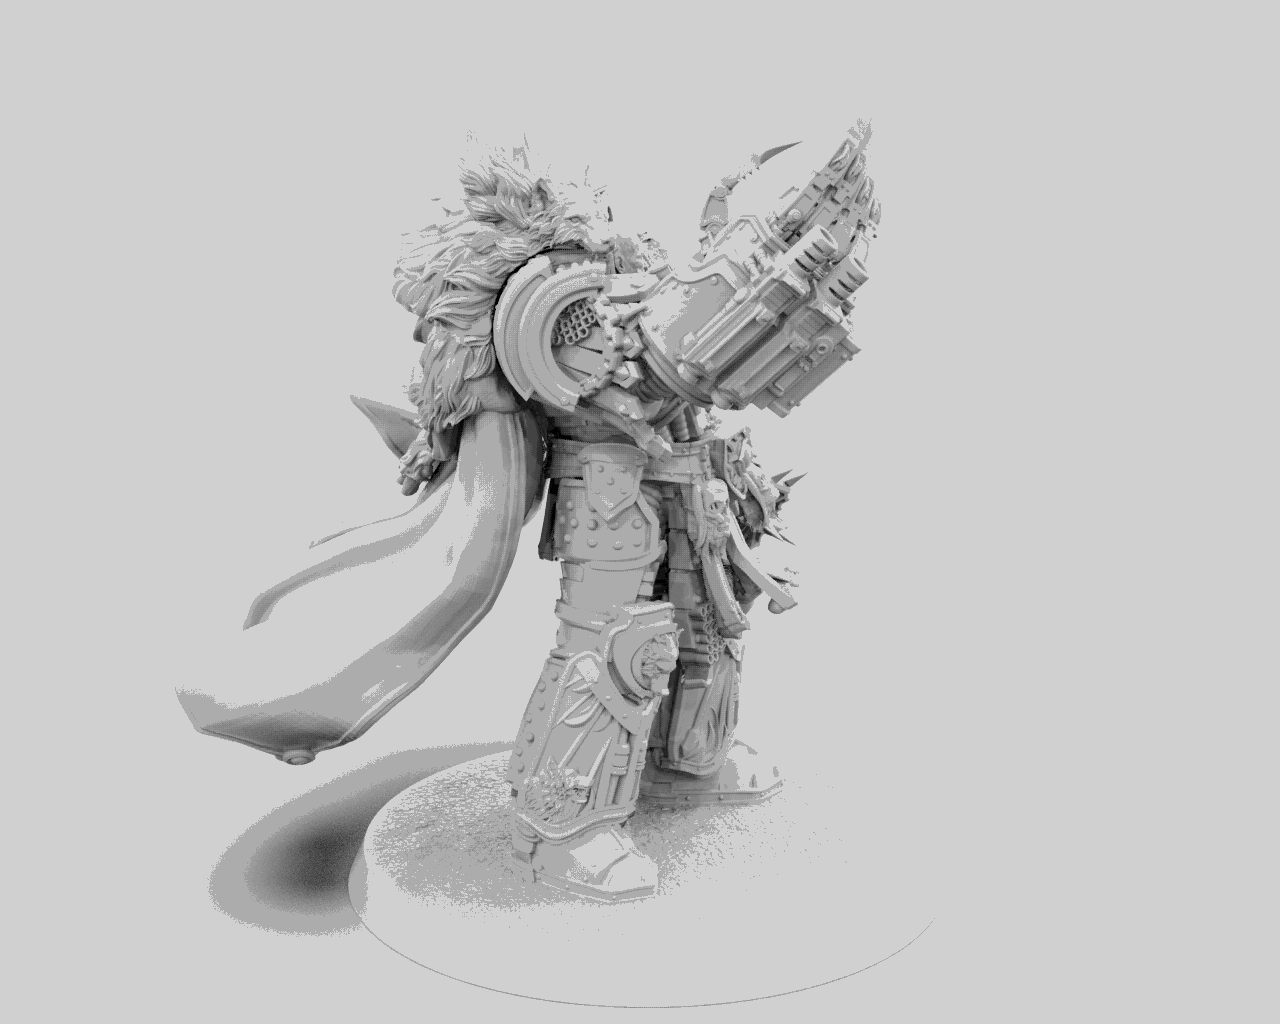 Horus Alternative Resin Model for Warhammer 40,000  Alternate resin model available to fans of Warhammer 40,000. This stunning model is made from high quality resin and is beautifully detailed.  This model is perfect for Warhammer 40,000 players and collectors. It is a great addition to any army and will impress your opponents.  Characteristics:  - Made of high quality resin  - Very detailed  - Alternate model, unofficial from Games Workshop